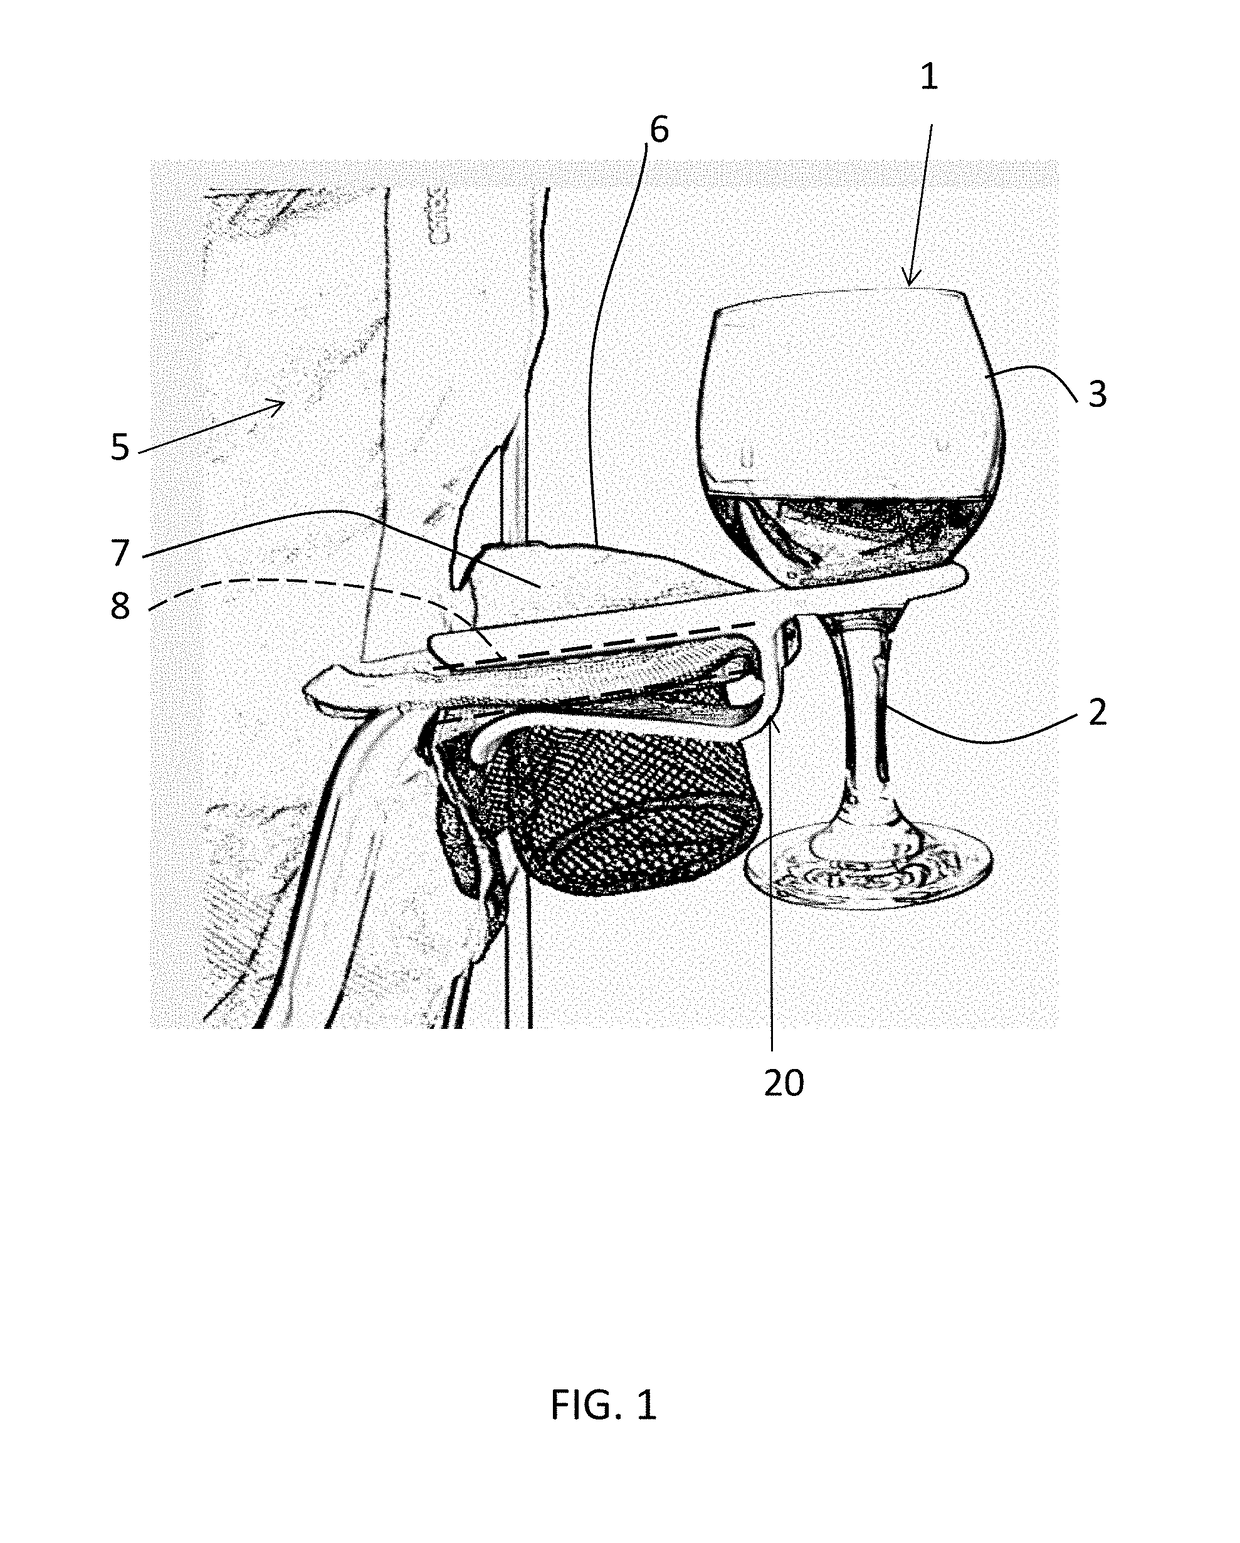 Device for holding a stemmed glass